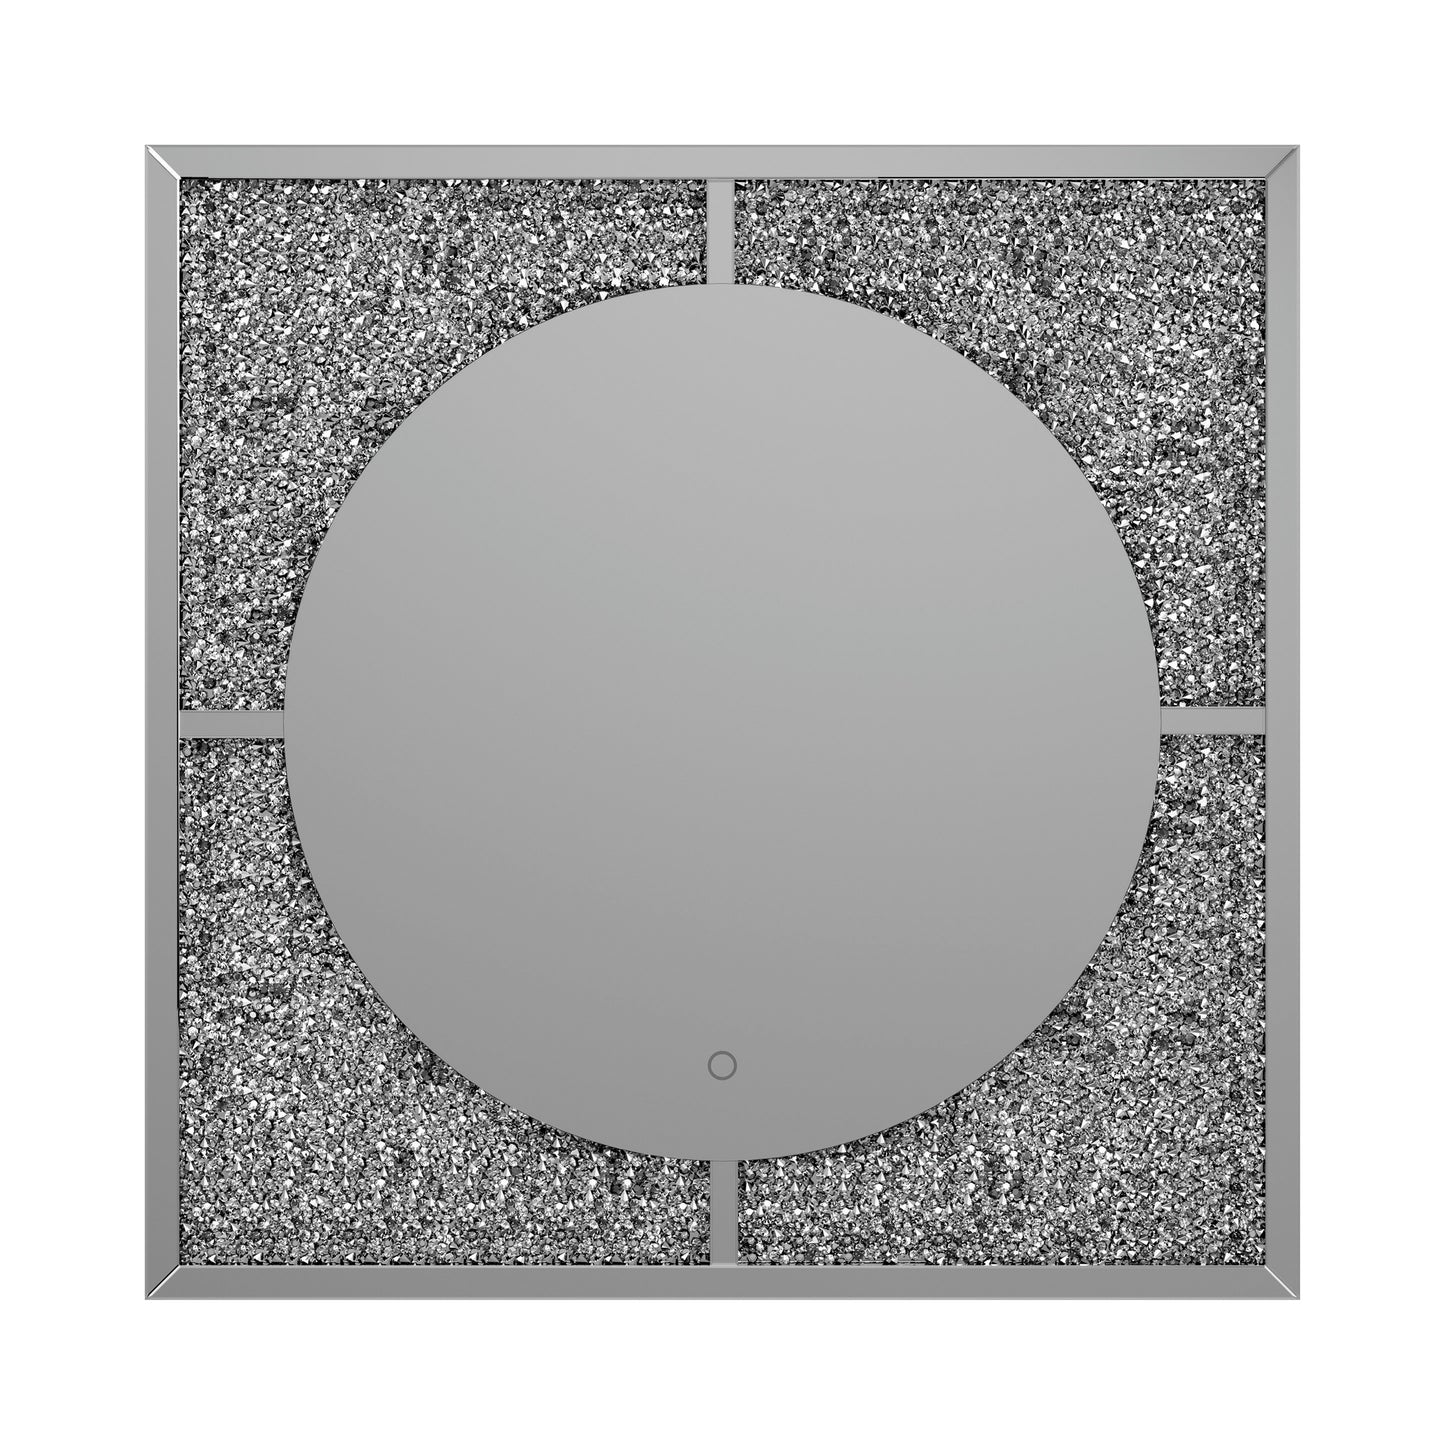 LED Wall Mirror Silver and Black